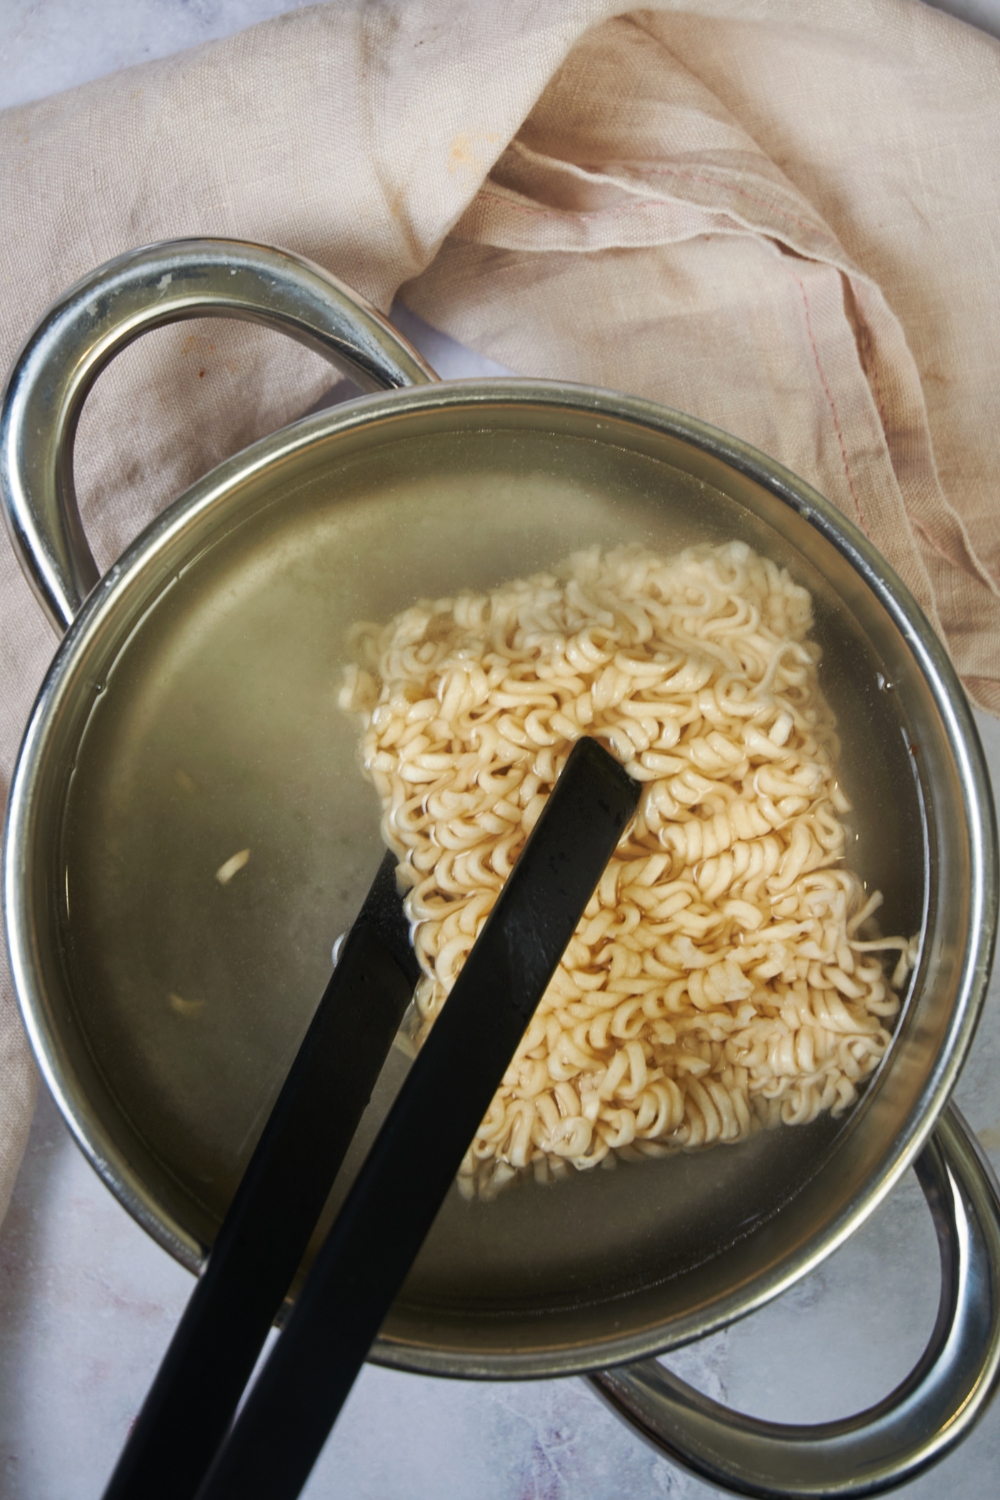 Tongs holding a block of ramen in a pot of water.